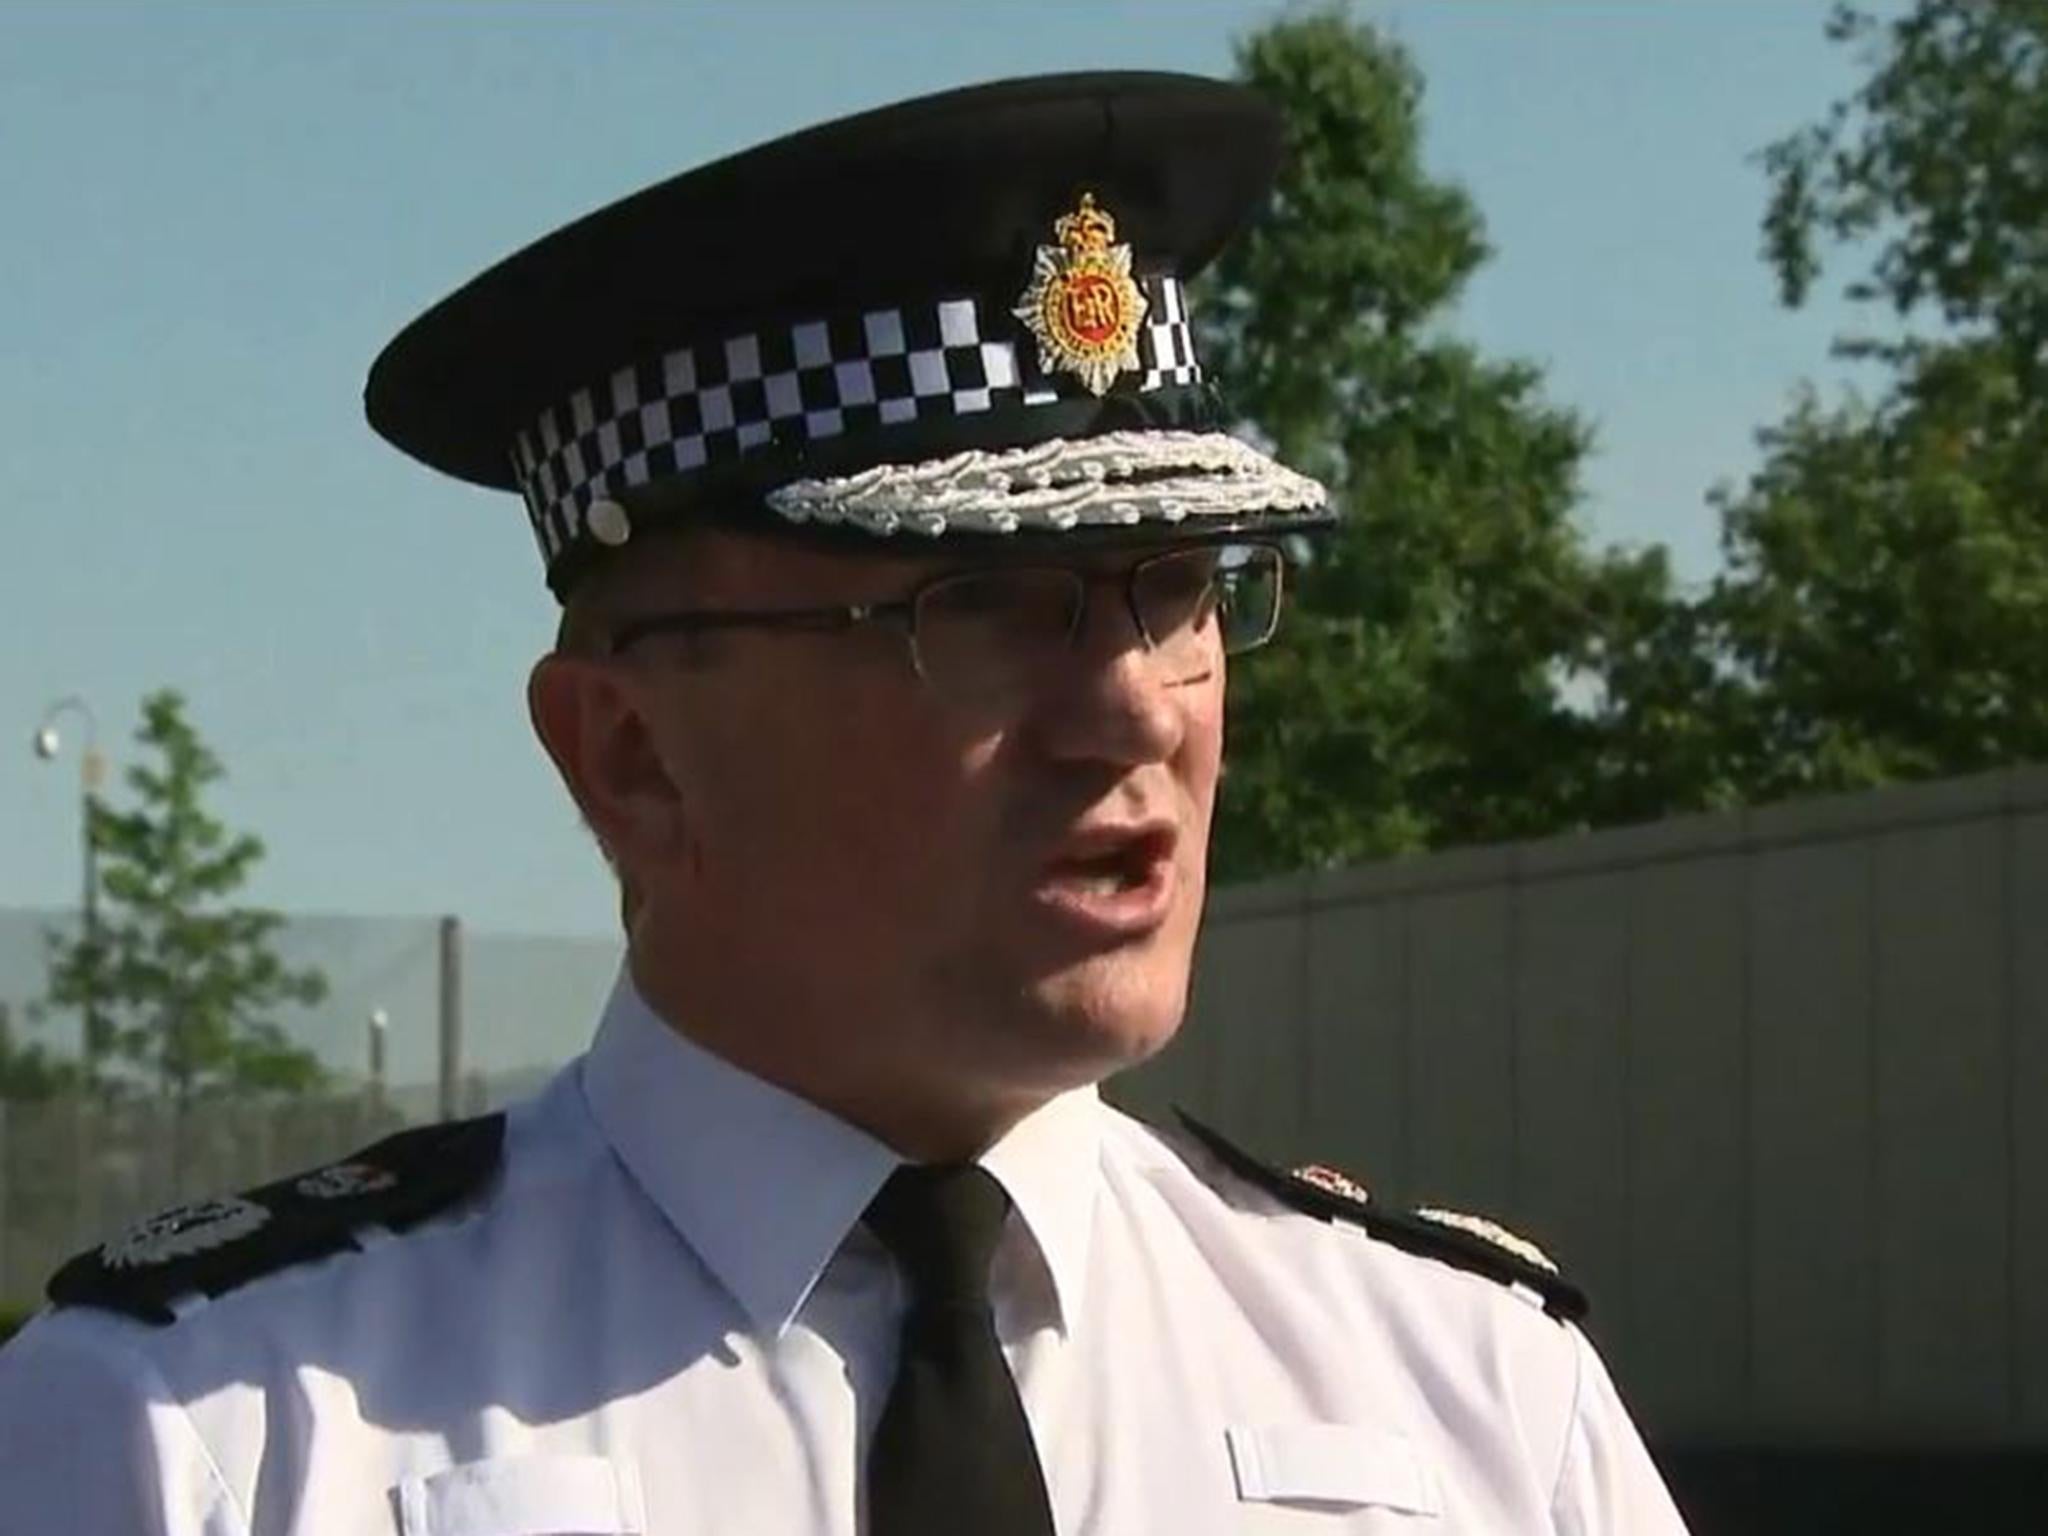 Chief Constable Ian Hopkins of Greater Manchester Police